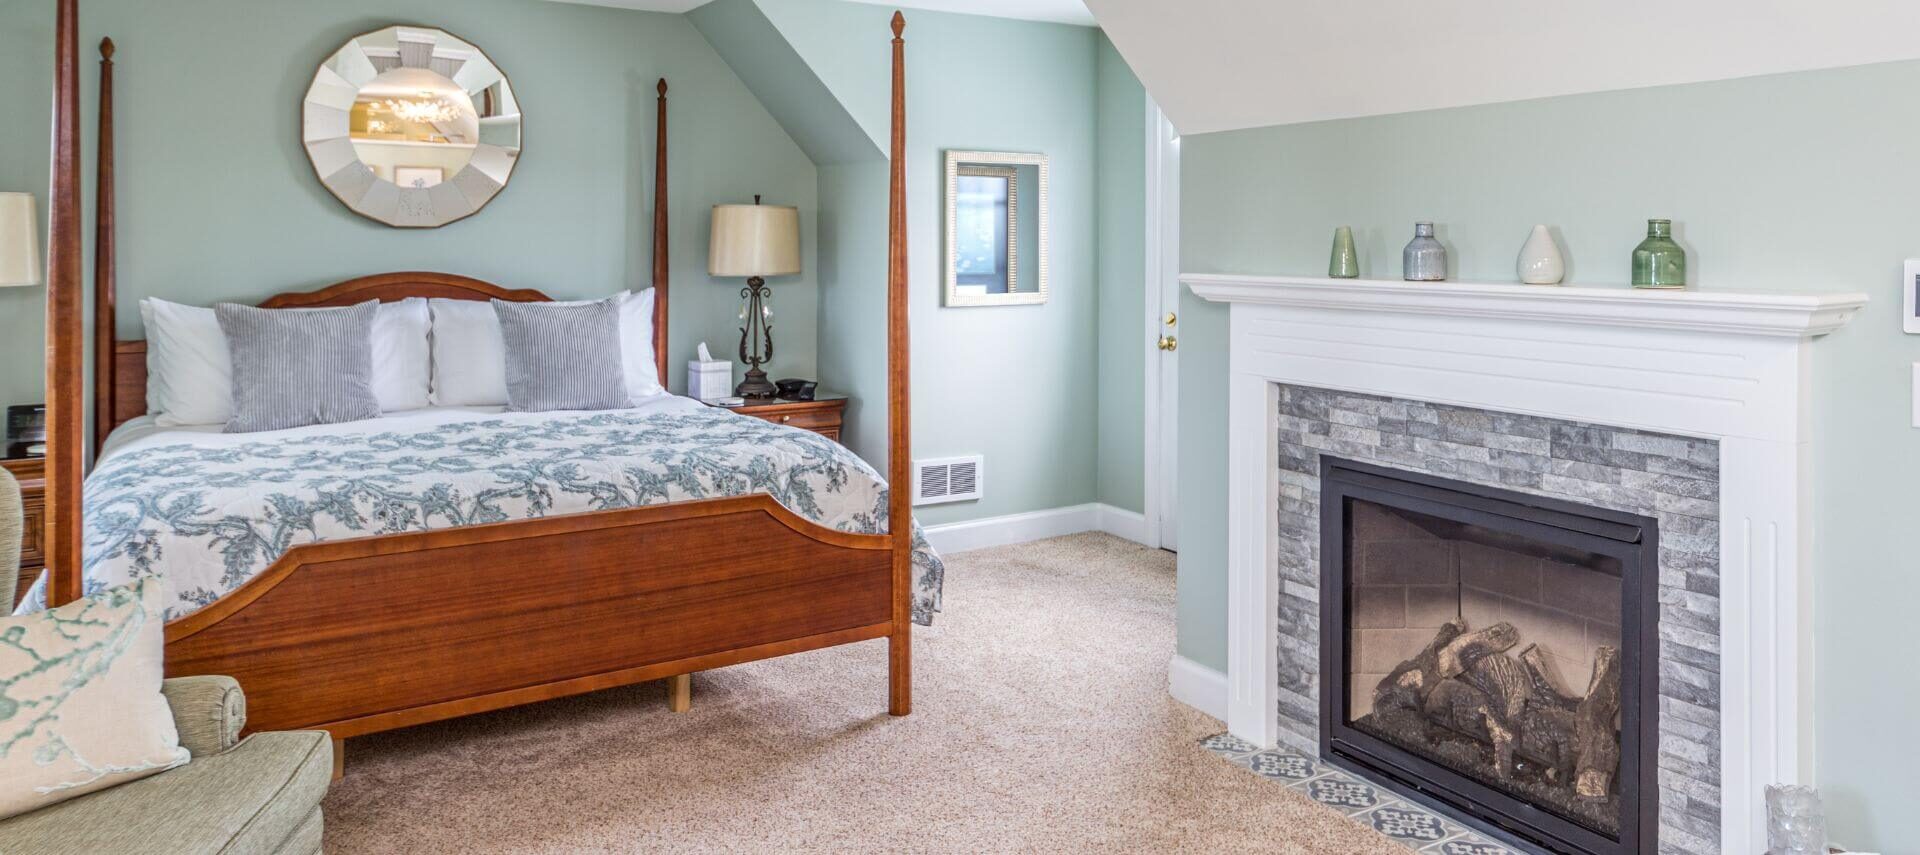 A bedroom with light blue walls, white trim, a large wood 4 poster bed with blue and white bedding, beige carpet, and a stone fireplace with a white wood mantle.